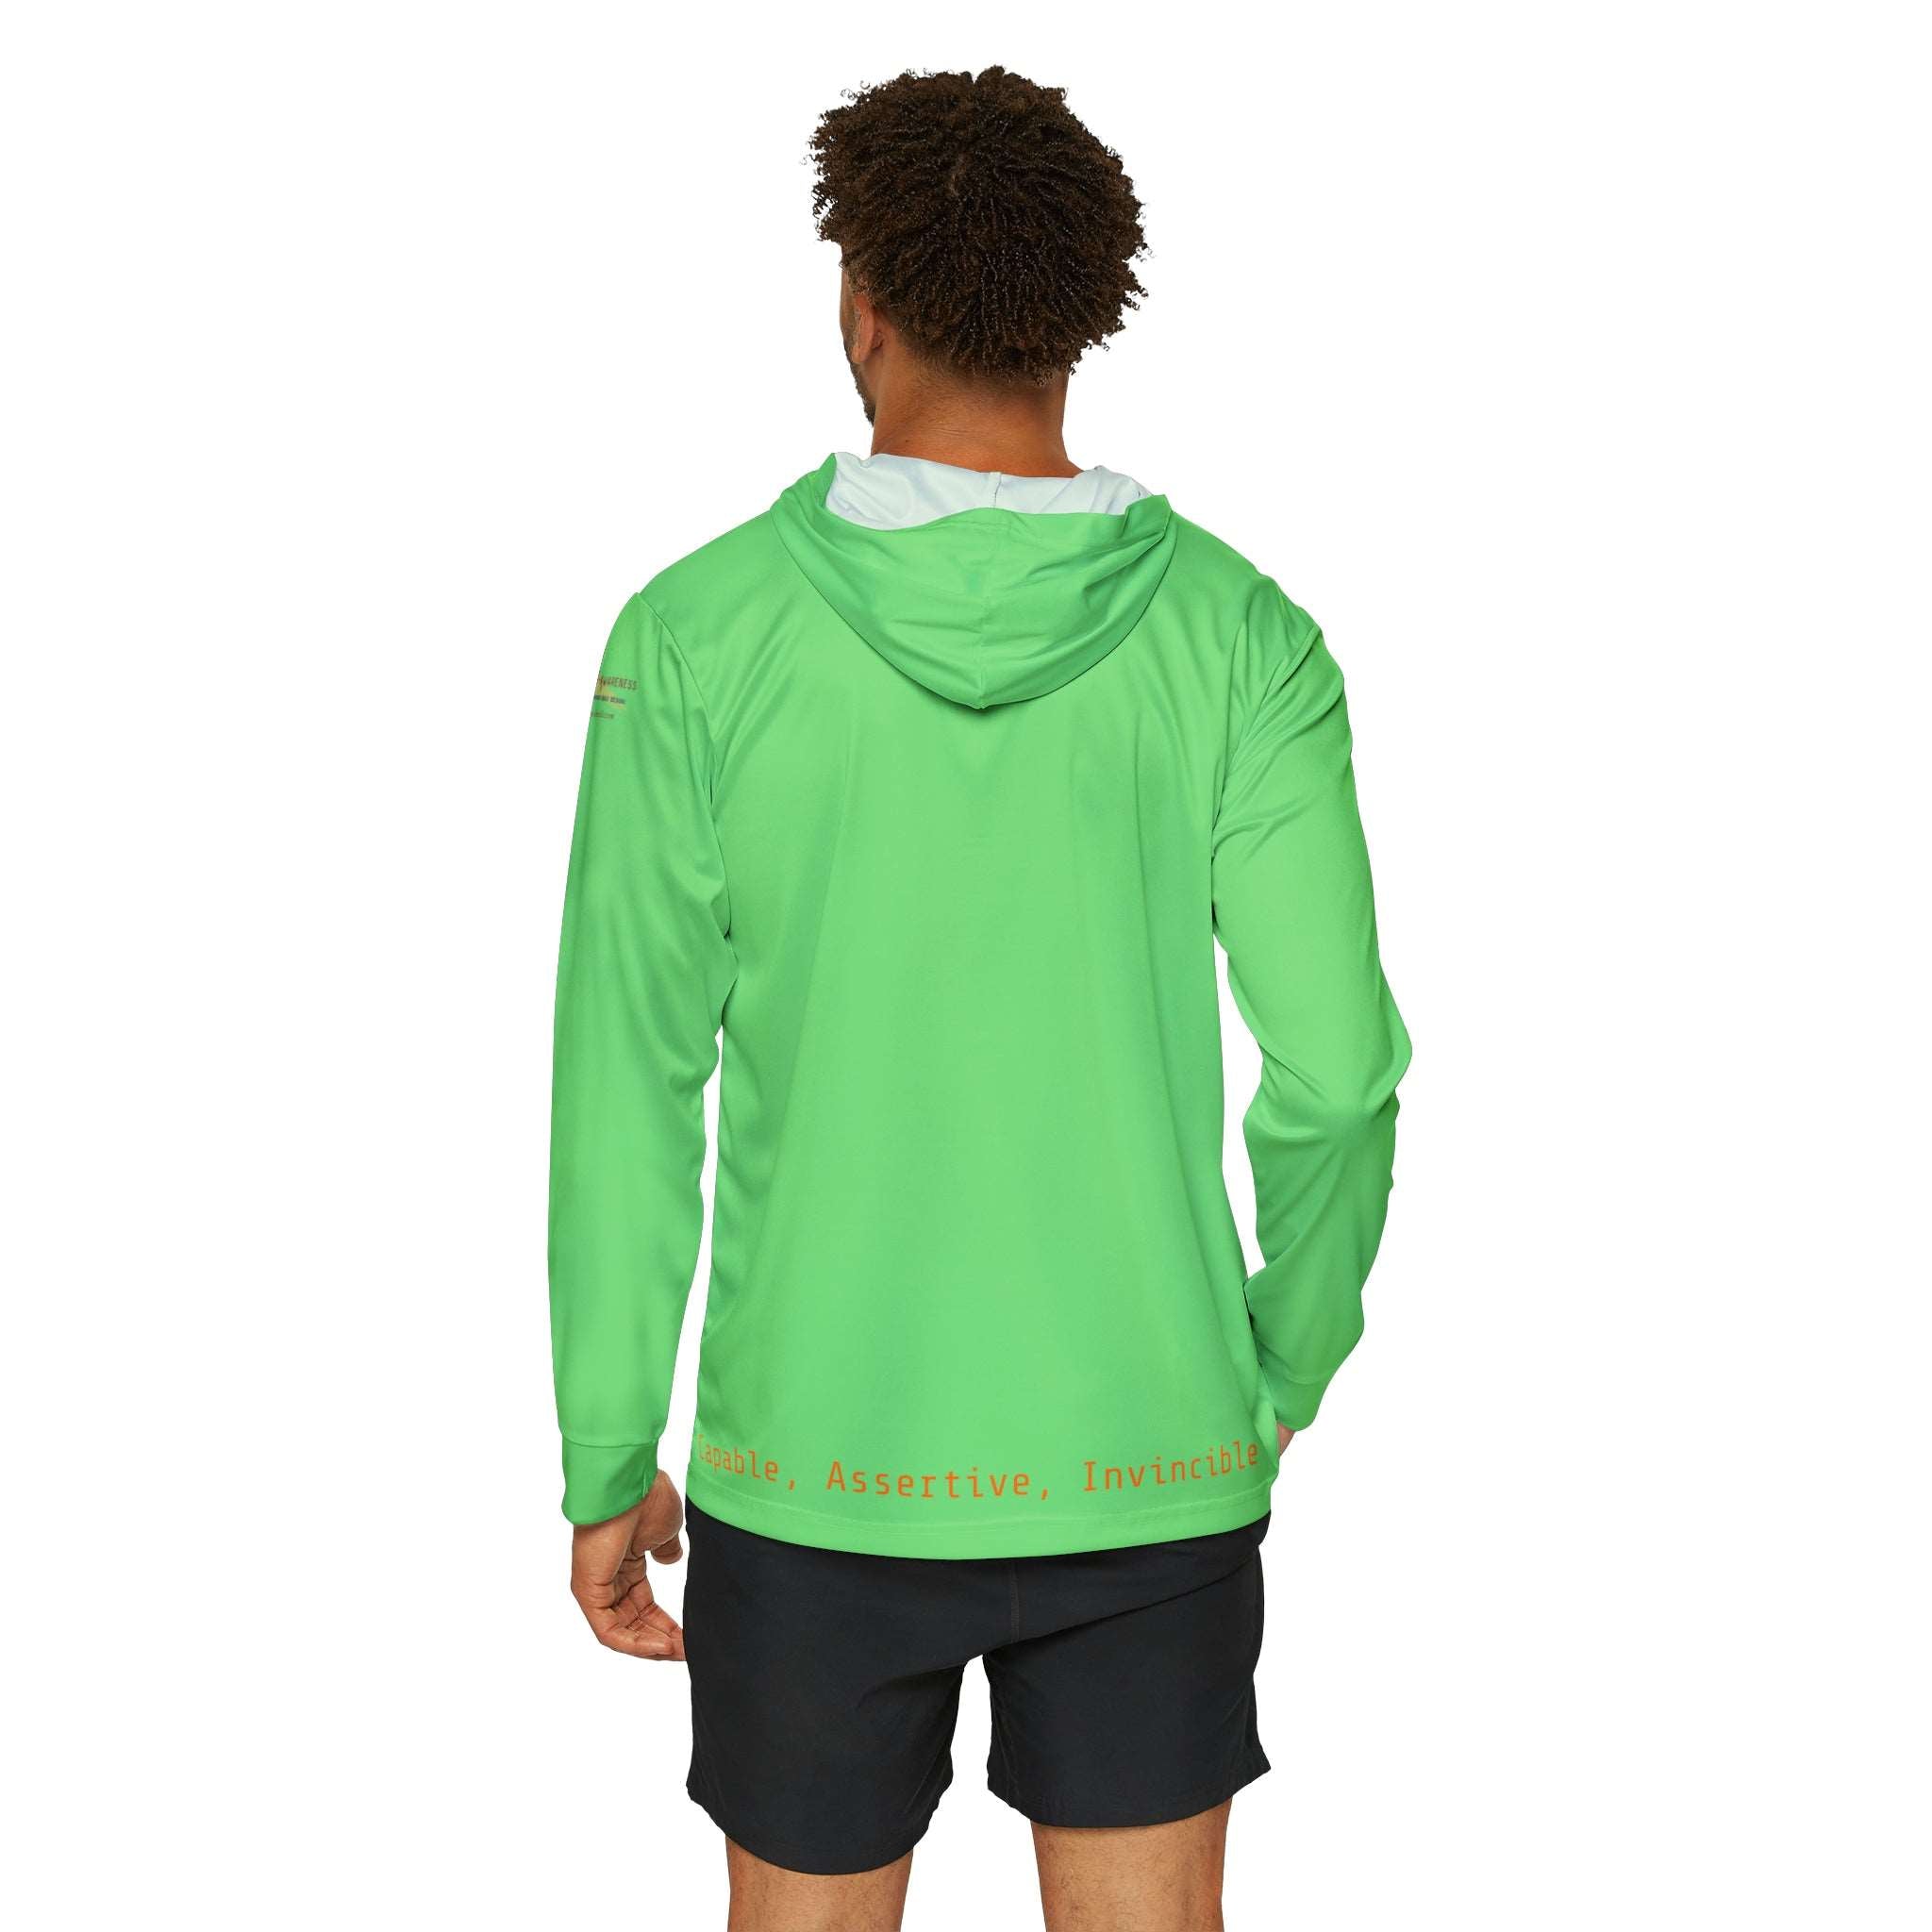 Determined Men's Warmup Hoodie Achieve Your Goals Activewear Durable Fabric Made in USA Men's Hoodie Mental Health Support Moisture-wicking Performance Apparel Quality Control Sports Warmup UPF 50+ All Over Prints 2936899575907880556_2048_0dd505bb-fc4c-4fe8-bd7a-20aef13c85fb Printify